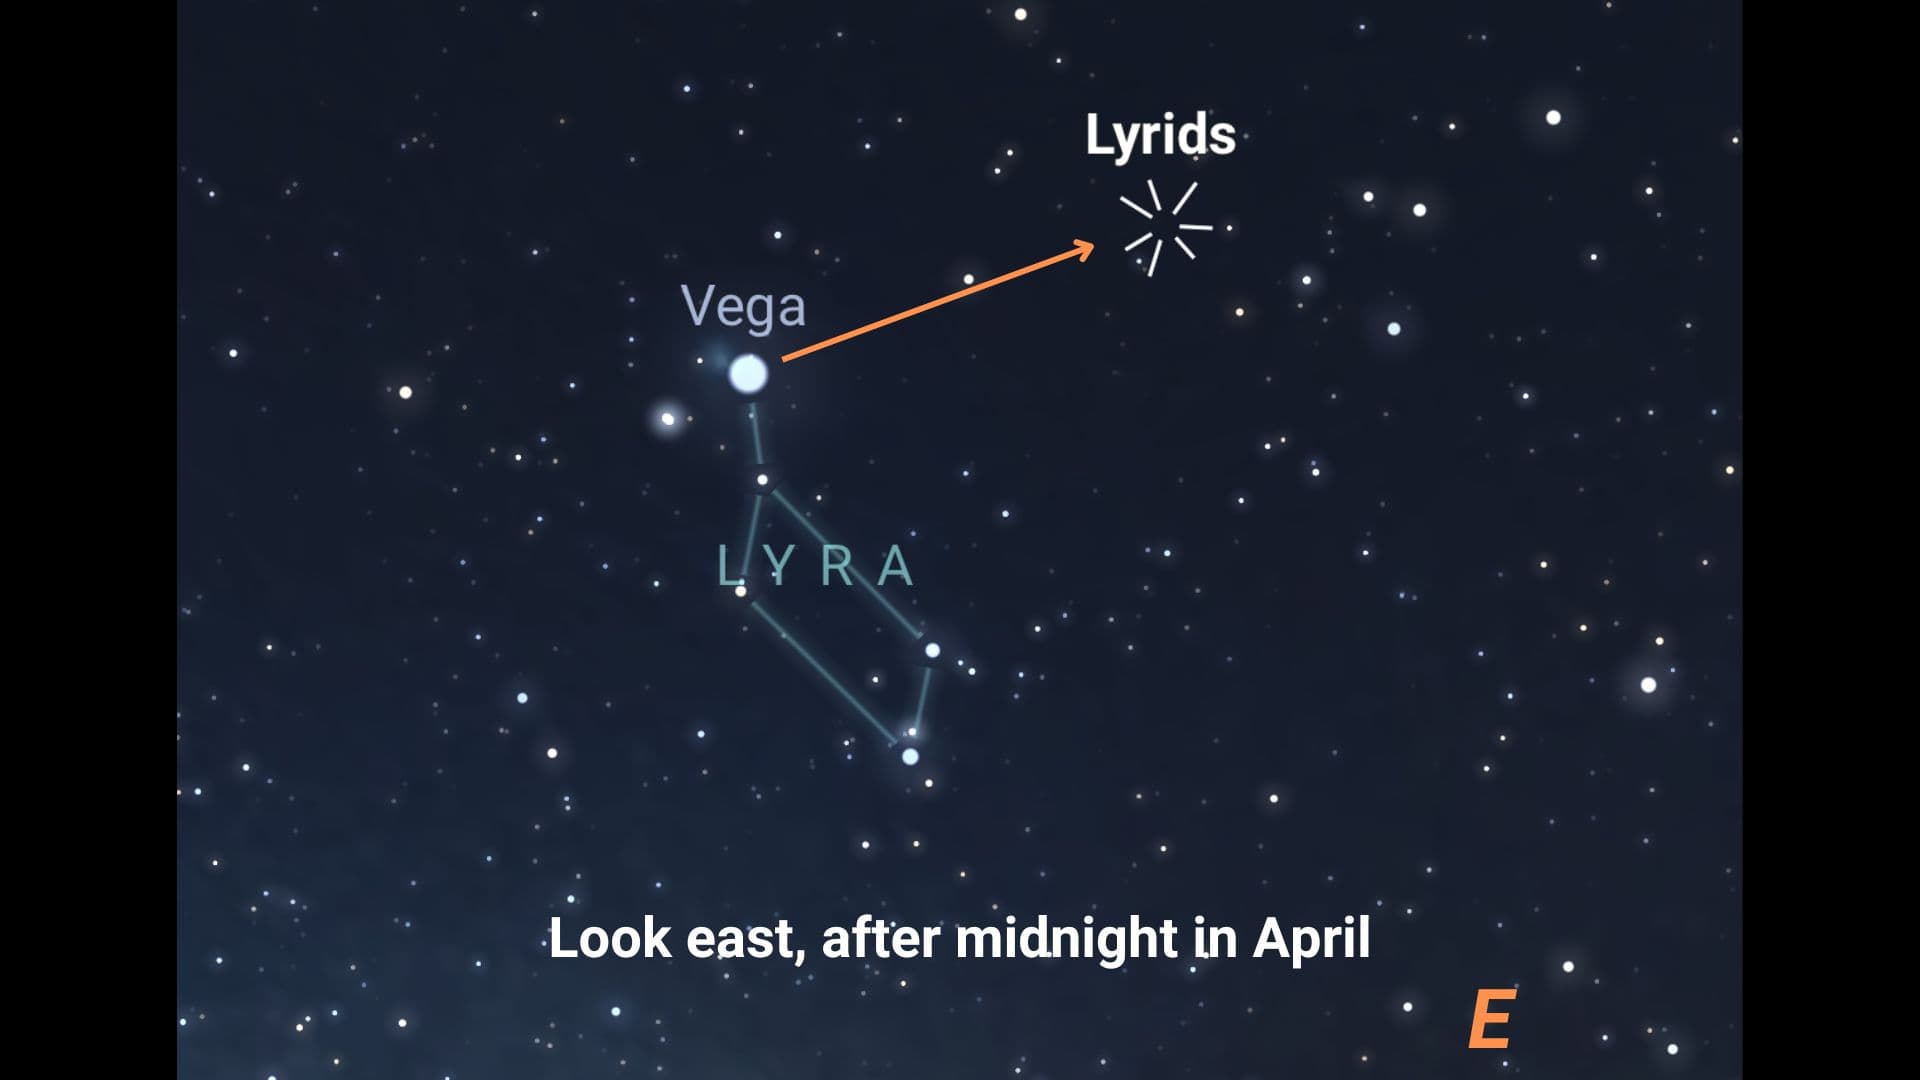 Radiant position of the Lyrid meteor shower